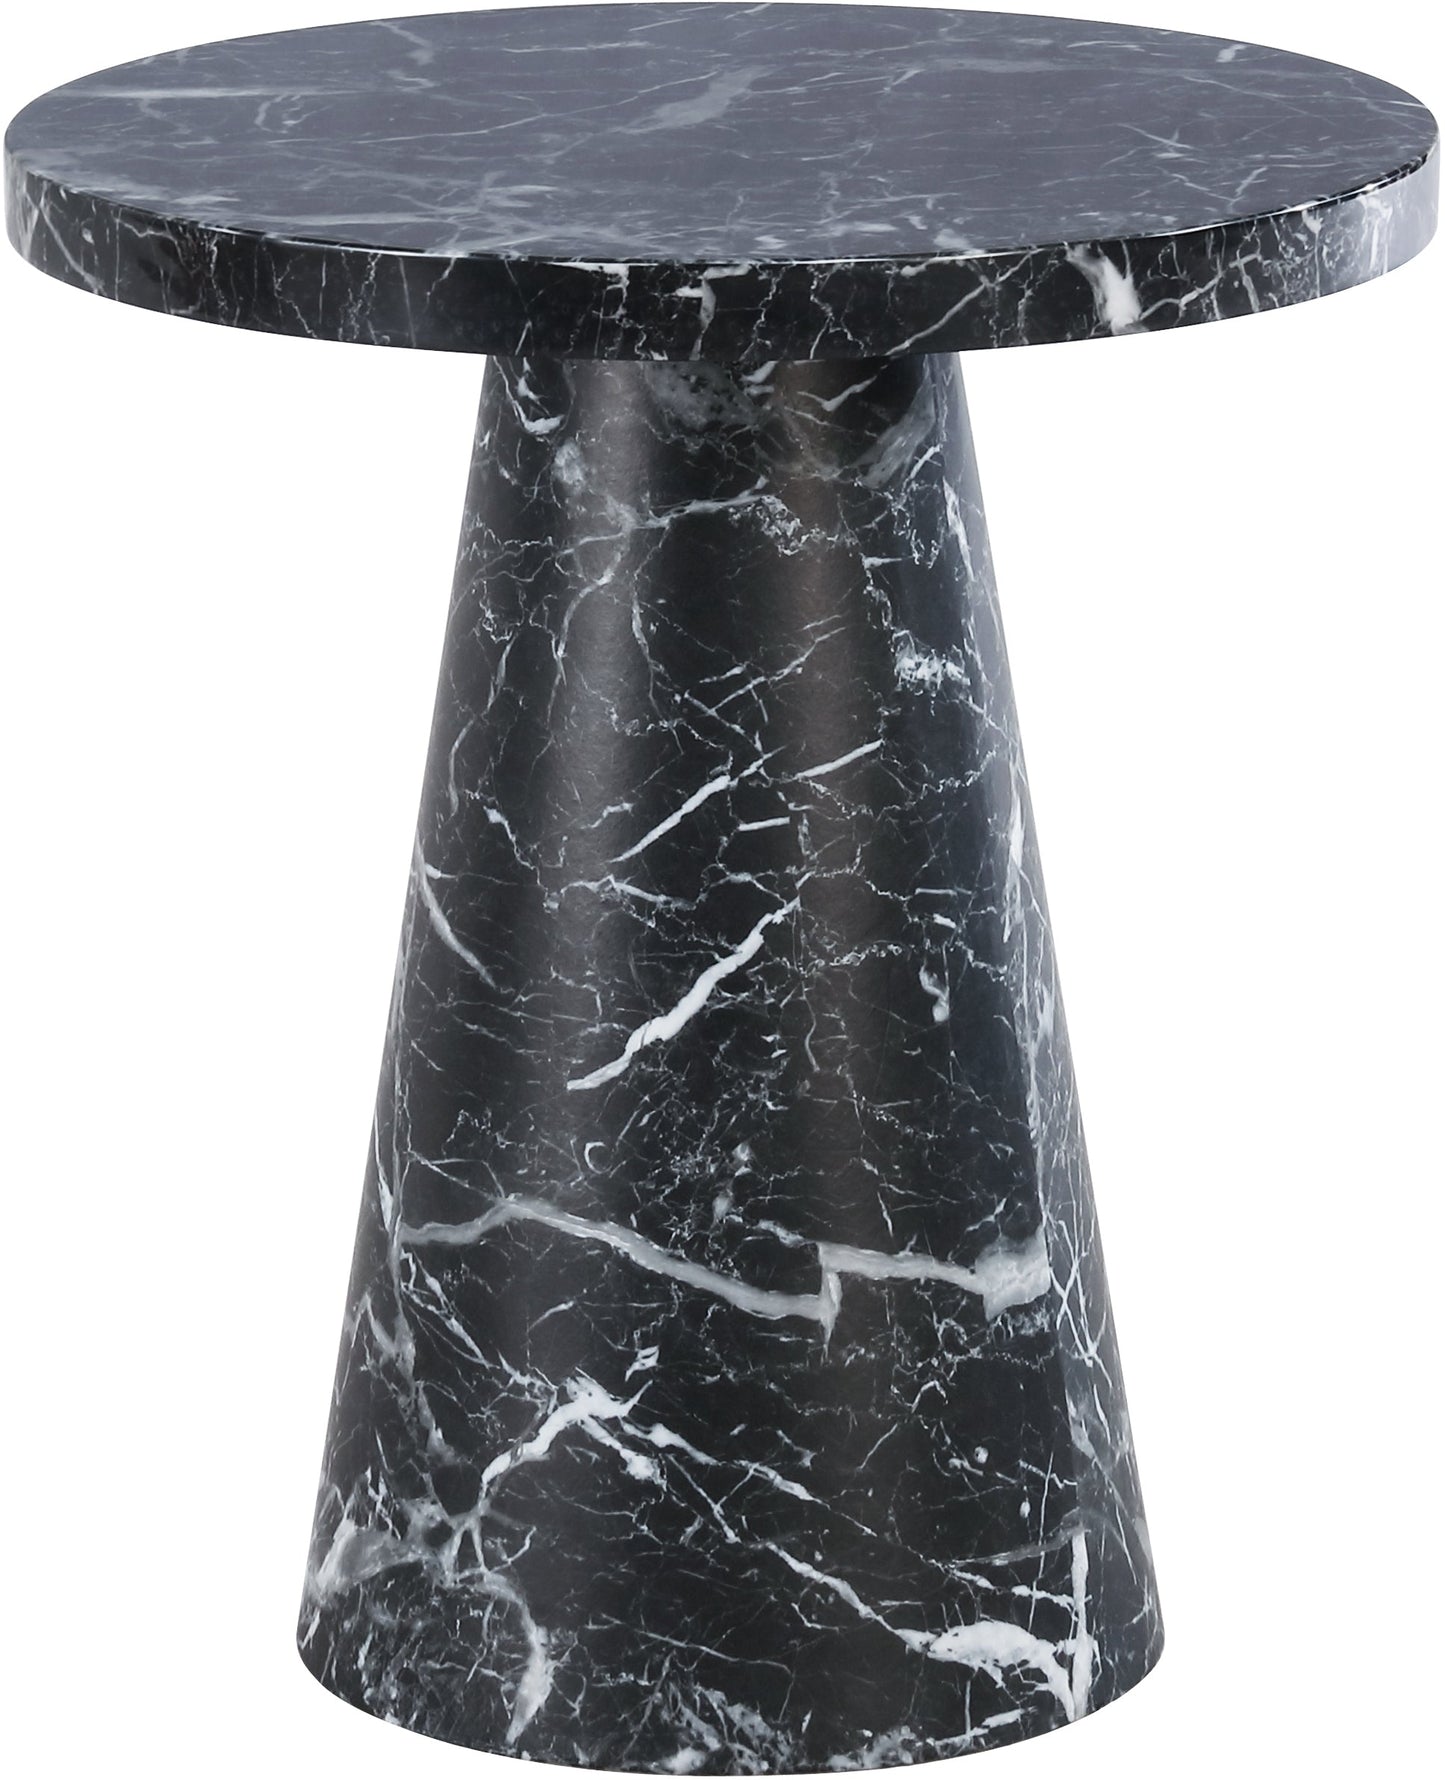 Omni Black Faux Marble End Table